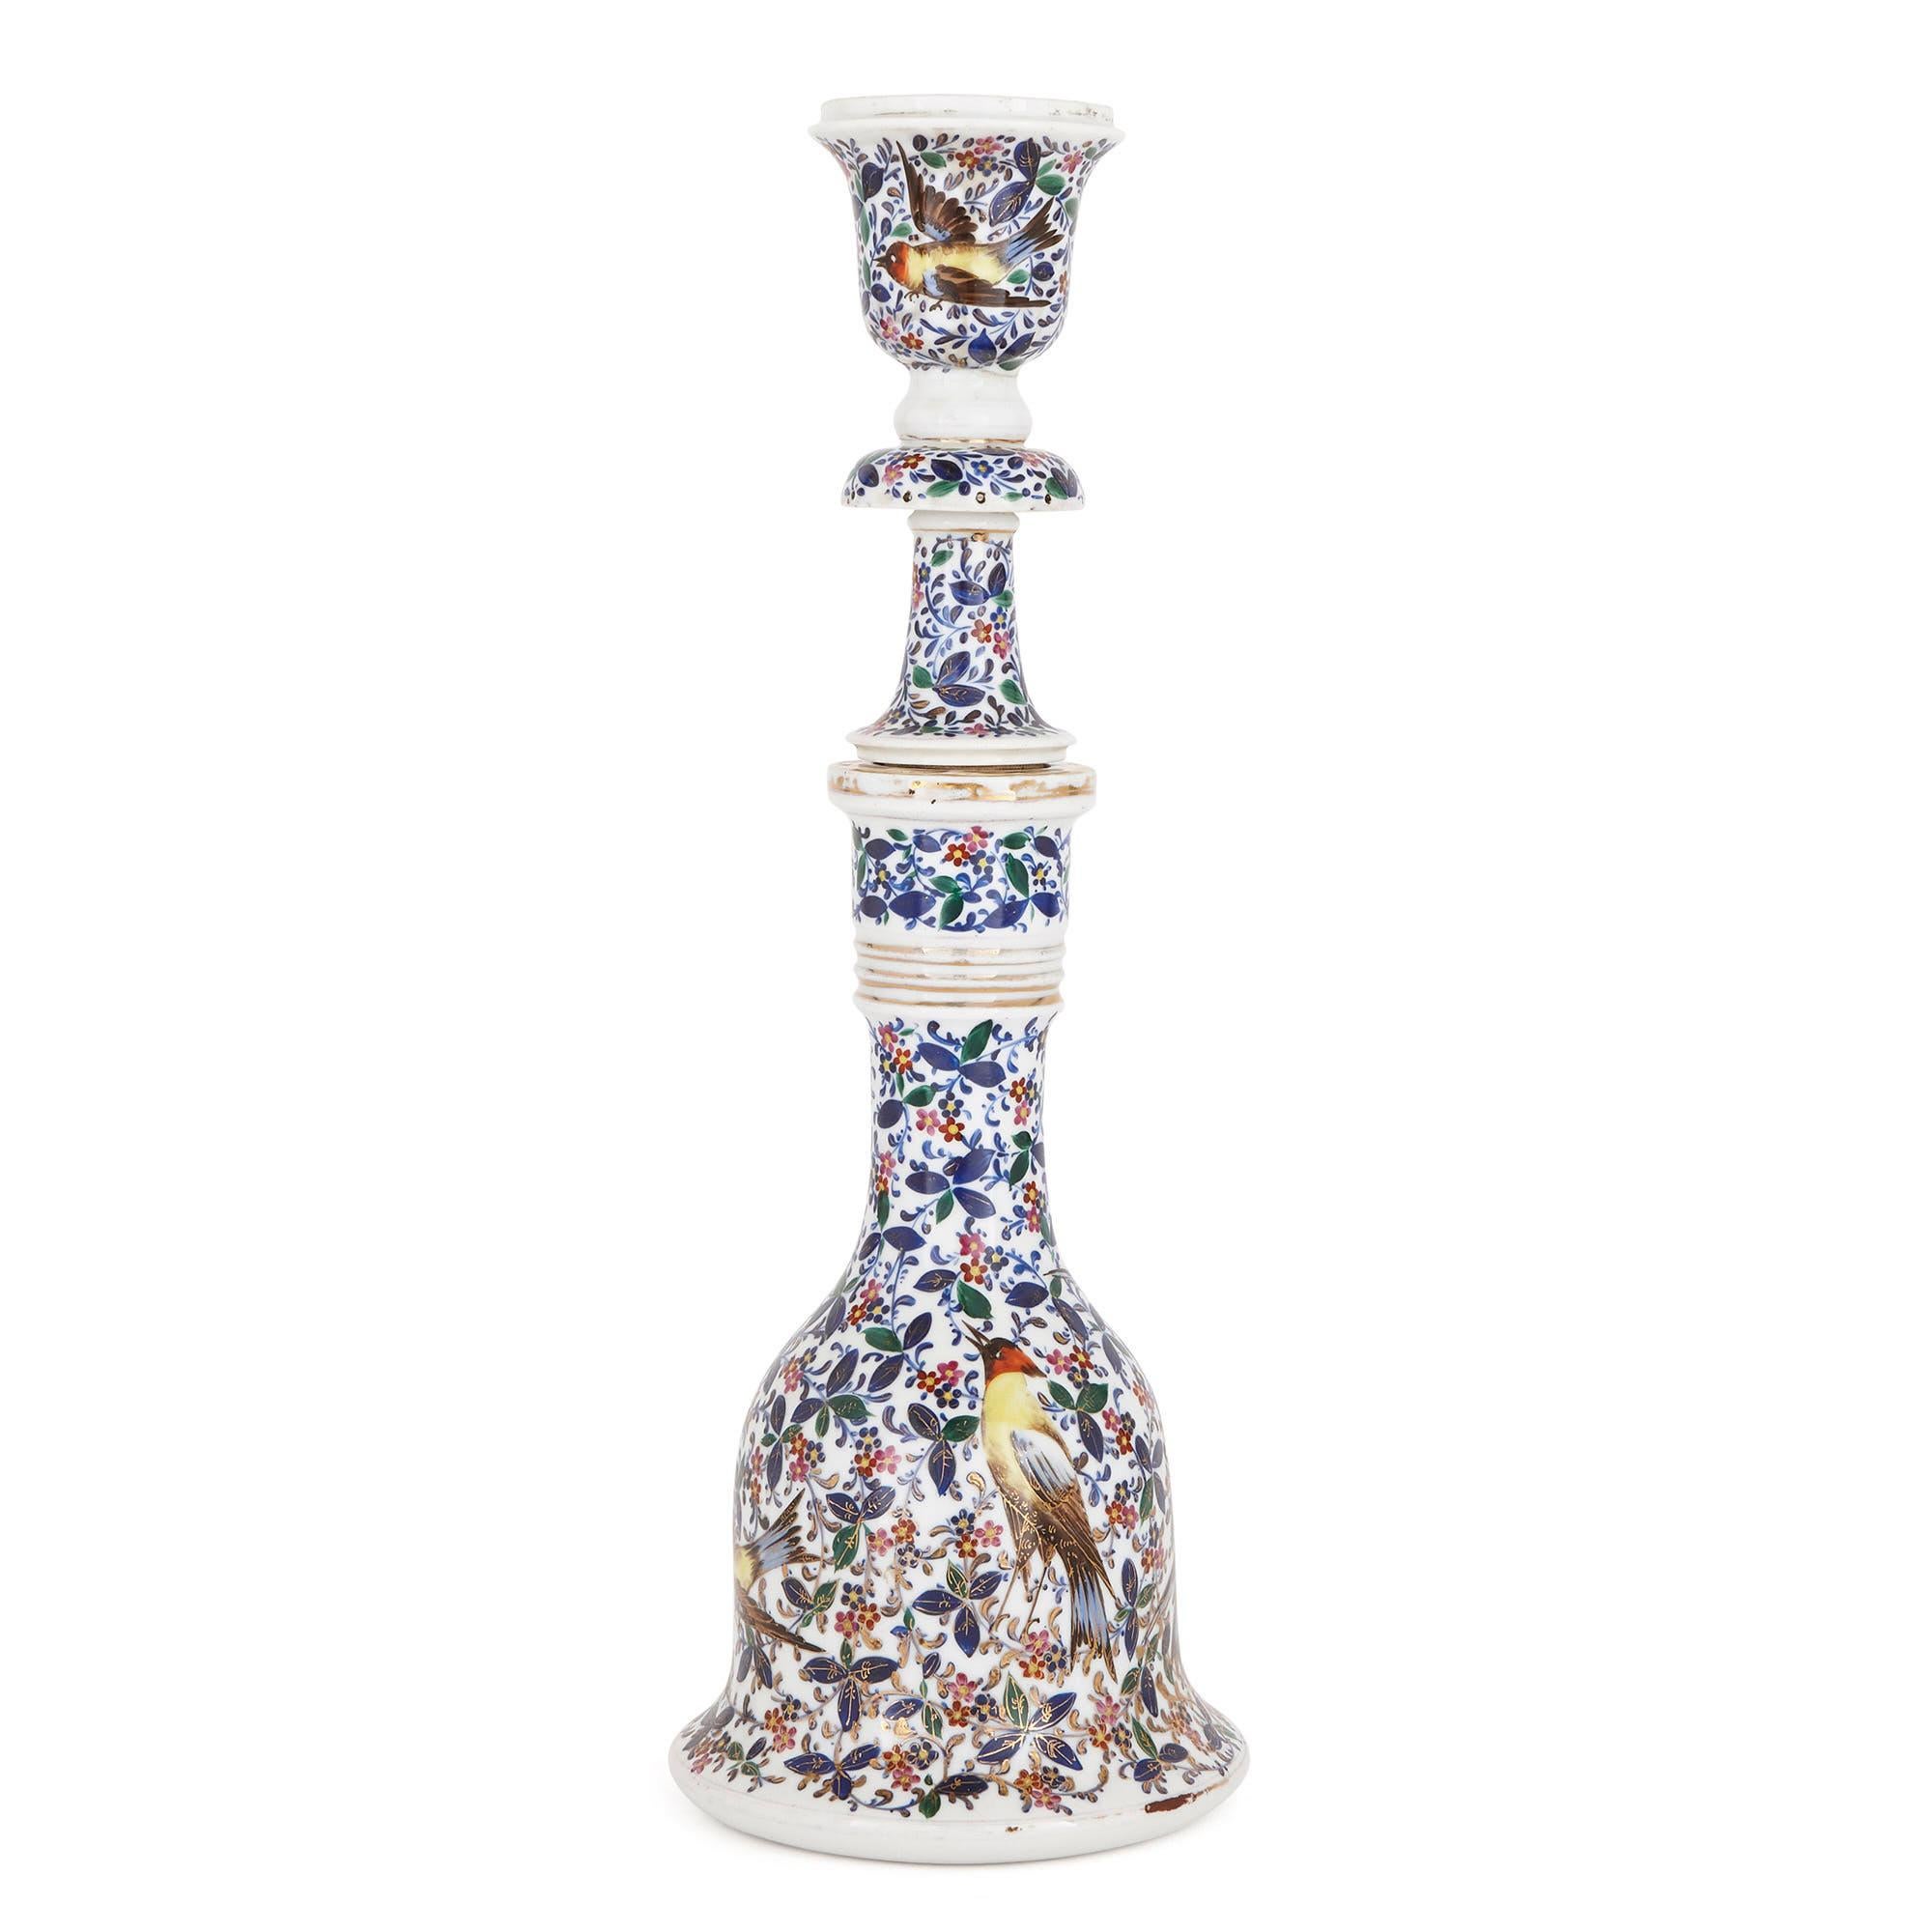 This huqqa (or hookah) is a wonderful item which is crafted from porcelain and finely hand painted and parcel gilt. The huqqa was created in the late 19th century, most likely in Russia.

The huqqa features a cup-shaped bowl which is set on a